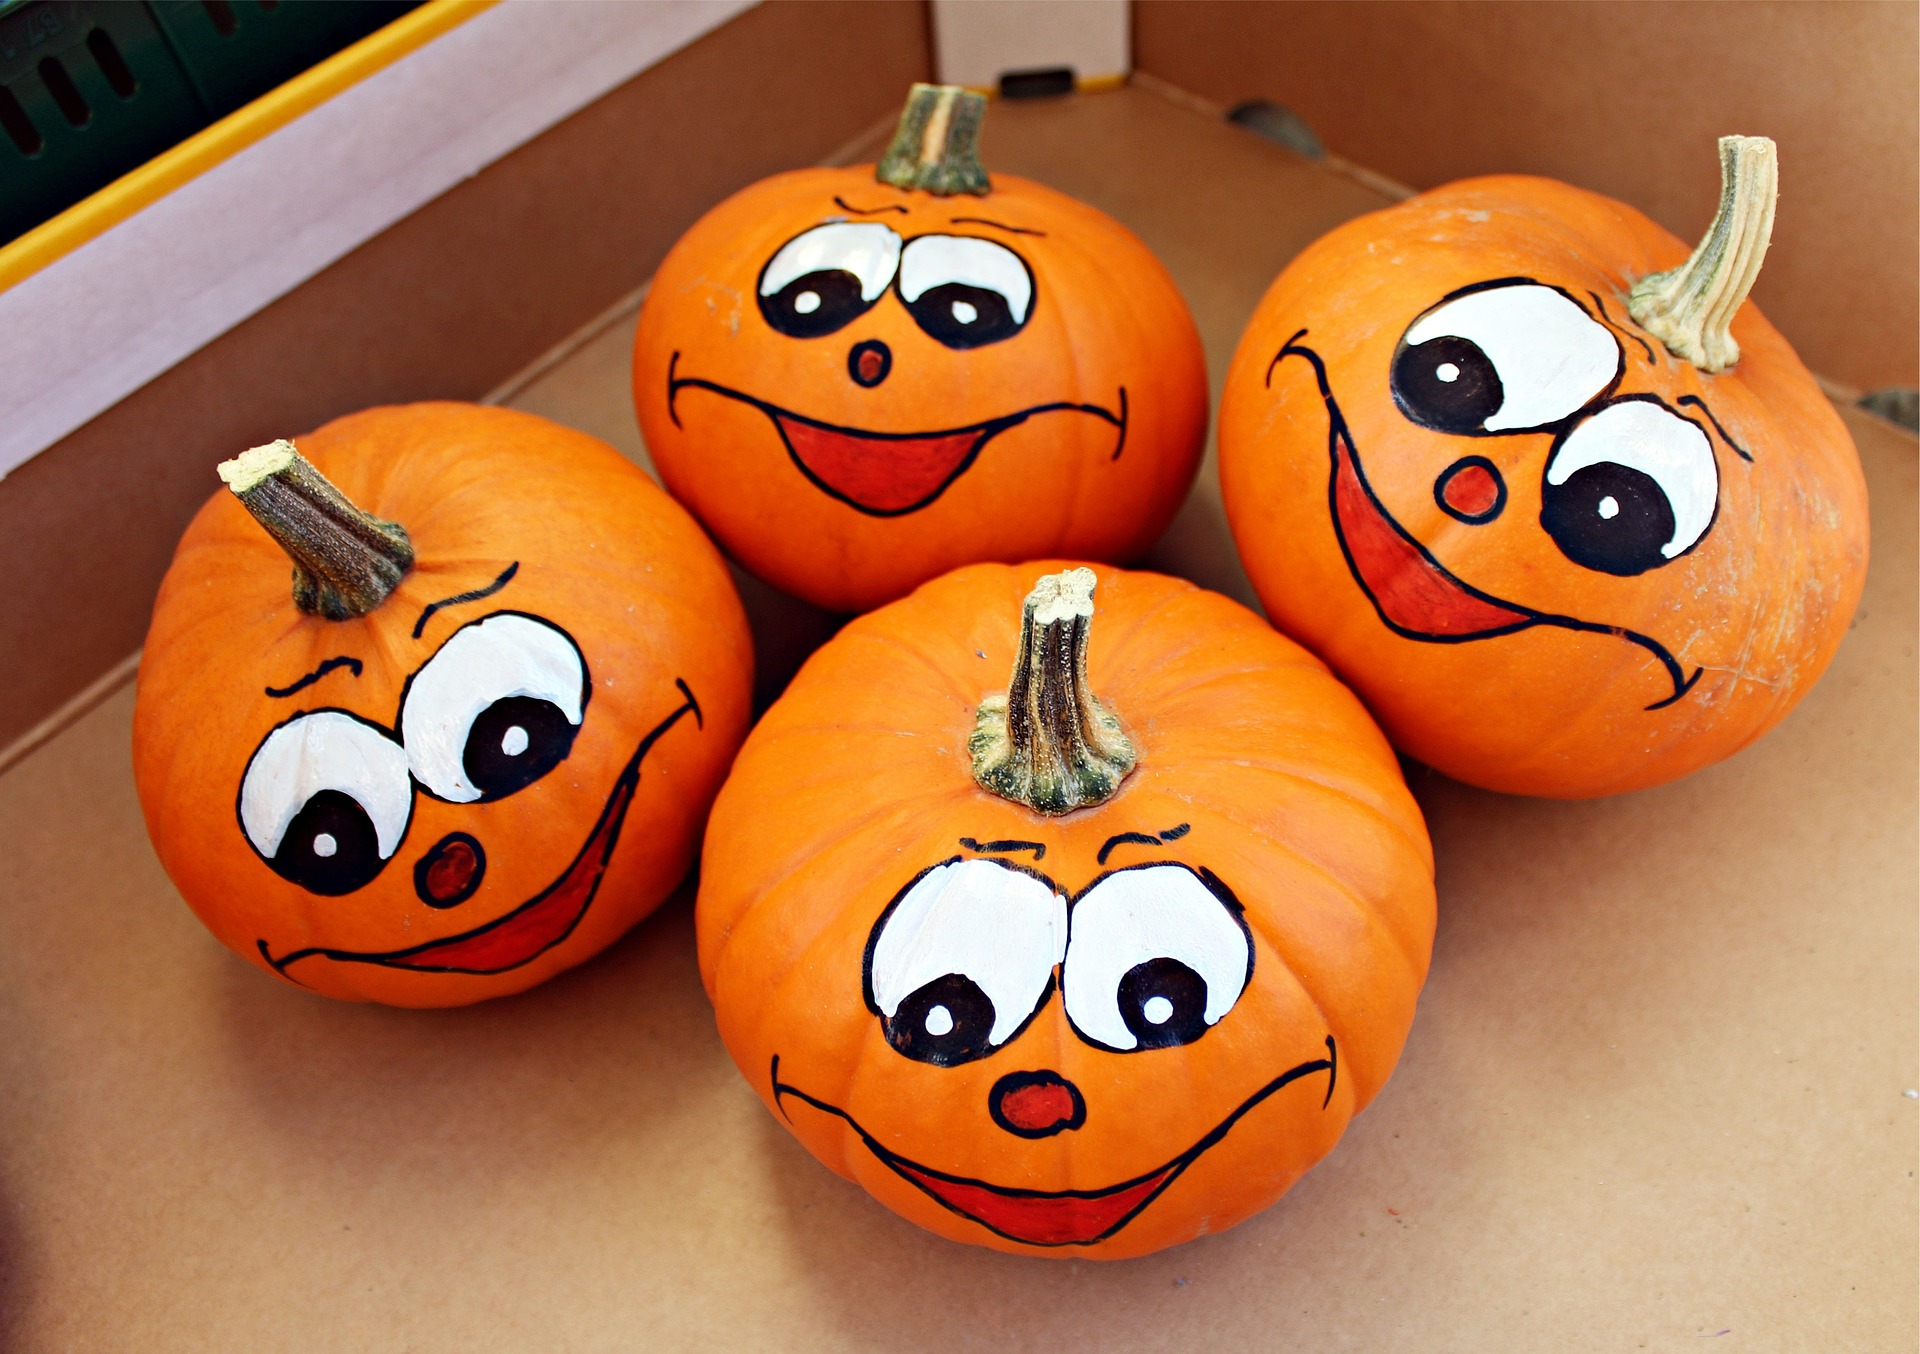 Pumpkins with silly expressions.